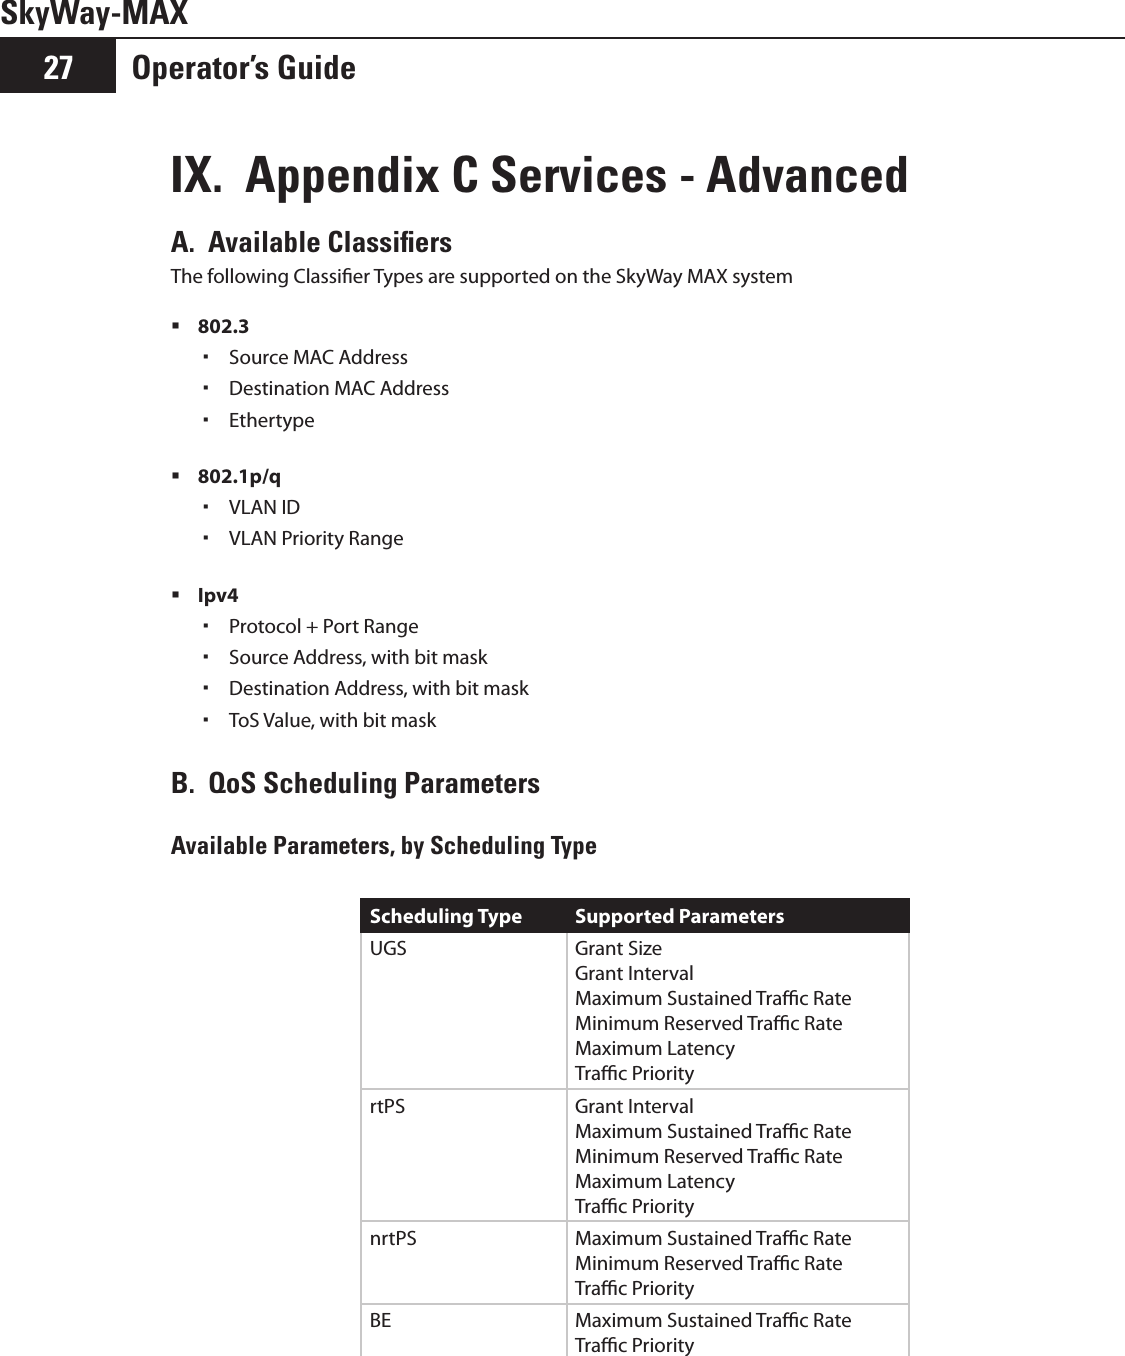 SkyWay-MAXOperator’s Guide27IX.  Appendix C Services - Advanced A.  Available ClassiﬁersThe following Classier Types are supported on the SkyWay MAX system802.3 Source MAC Address Destination MAC Address Ethertype 802.1p/q VLAN ID VLAN Priority Range Ipv4 Protocol + Port Range Source Address, with bit mask Destination Address, with bit mask ToS Value, with bit mask B.  QoS Scheduling ParametersAvailable Parameters, by Scheduling TypeScheduling Type Supported ParametersUGS Grant SizeGrant IntervalMaximum Sustained Trac RateMinimum Reserved Trac RateMaximum LatencyTrac PriorityrtPS Grant IntervalMaximum Sustained Trac RateMinimum Reserved Trac RateMaximum LatencyTrac PrioritynrtPS Maximum Sustained Trac RateMinimum Reserved Trac RateTrac PriorityBE Maximum Sustained Trac RateTrac Priority